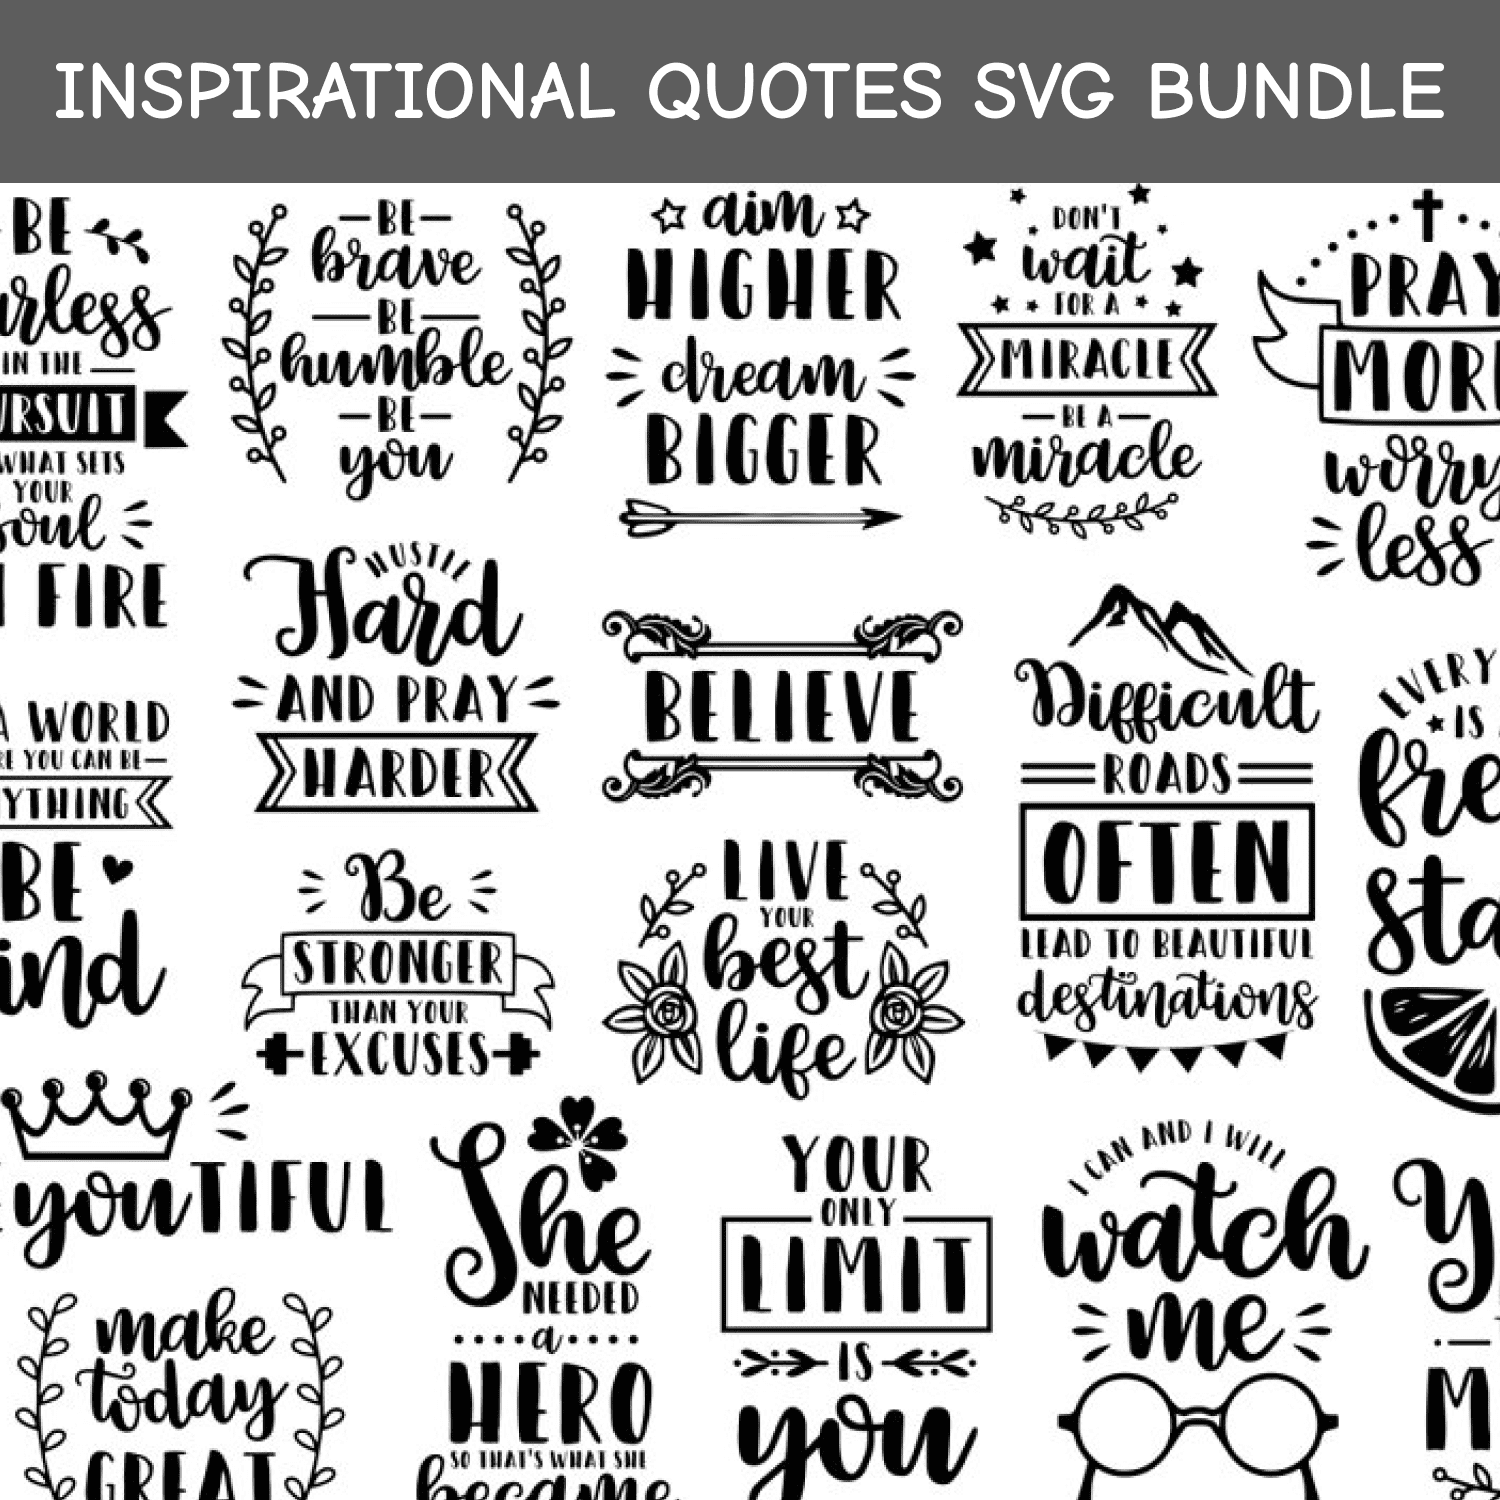 Inspirational quotes SVG Bundle cover.